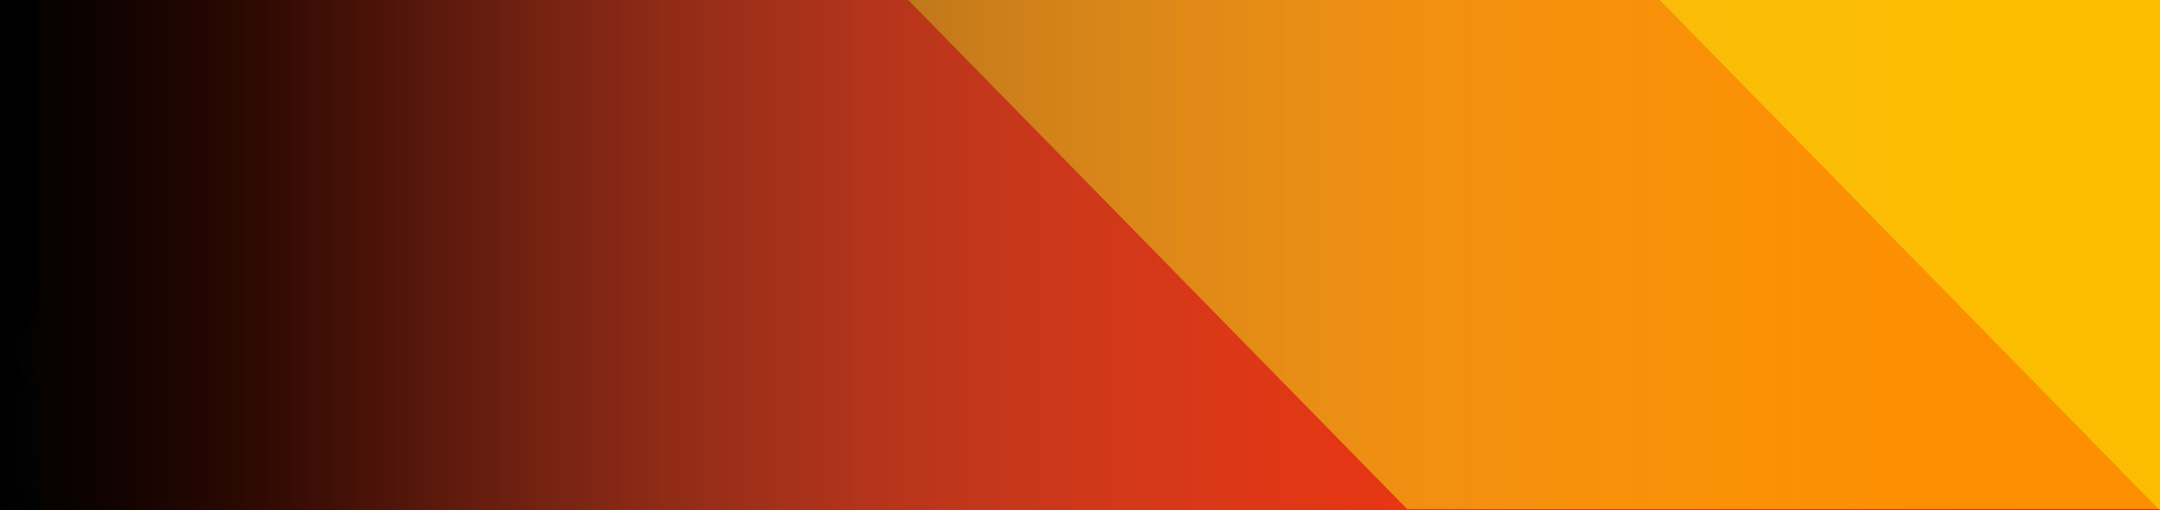 Red, Orange and Yellow colored shapes